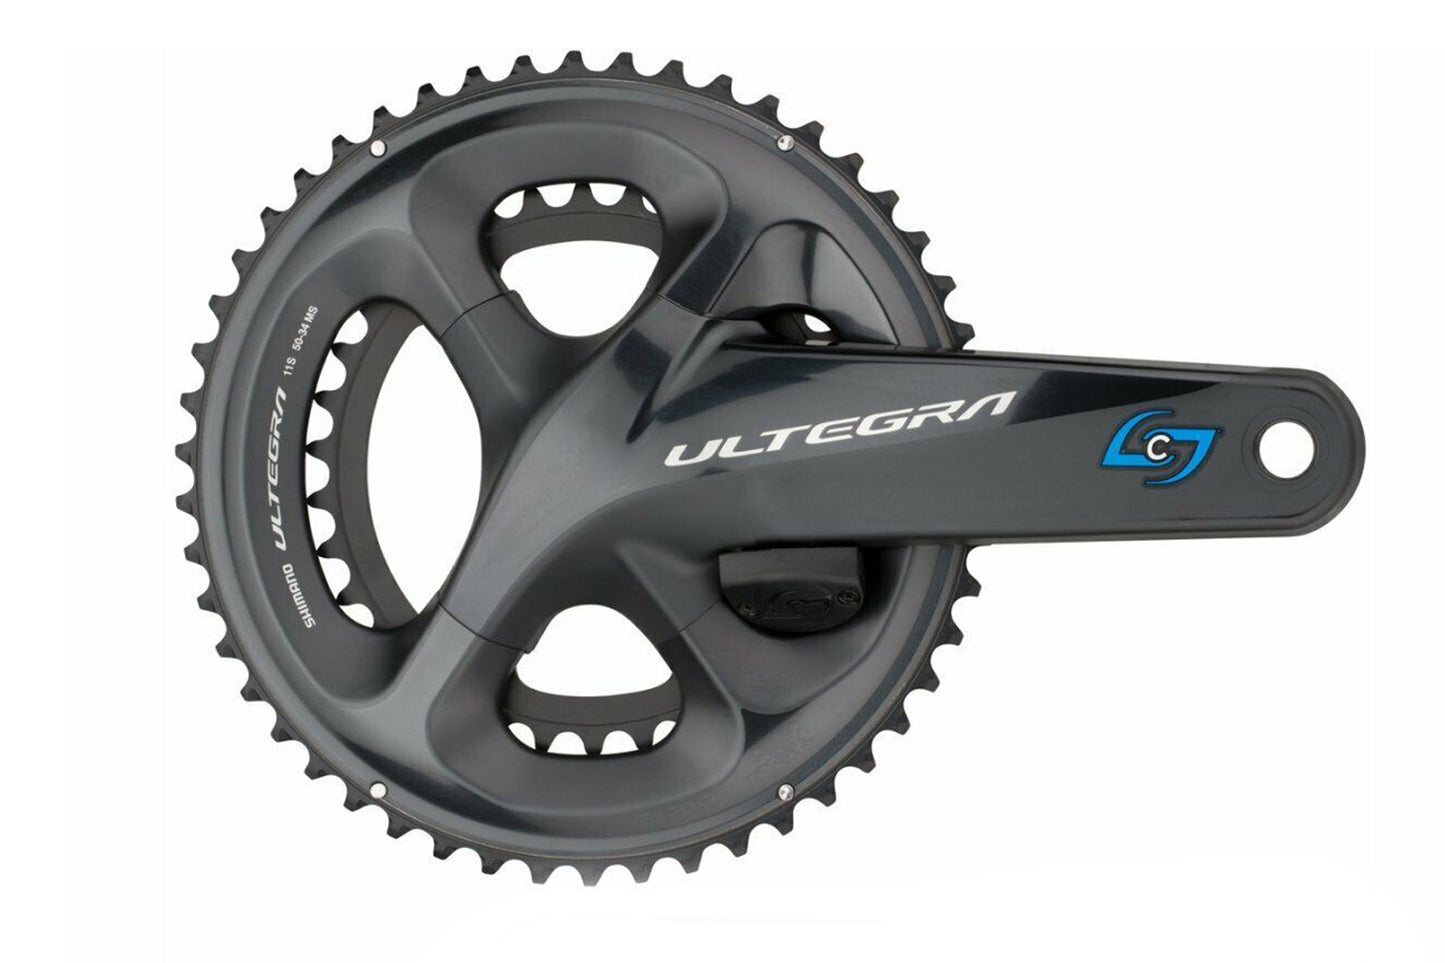 Stages Power Meter R Ultegra R8000 172.5mm 52/36